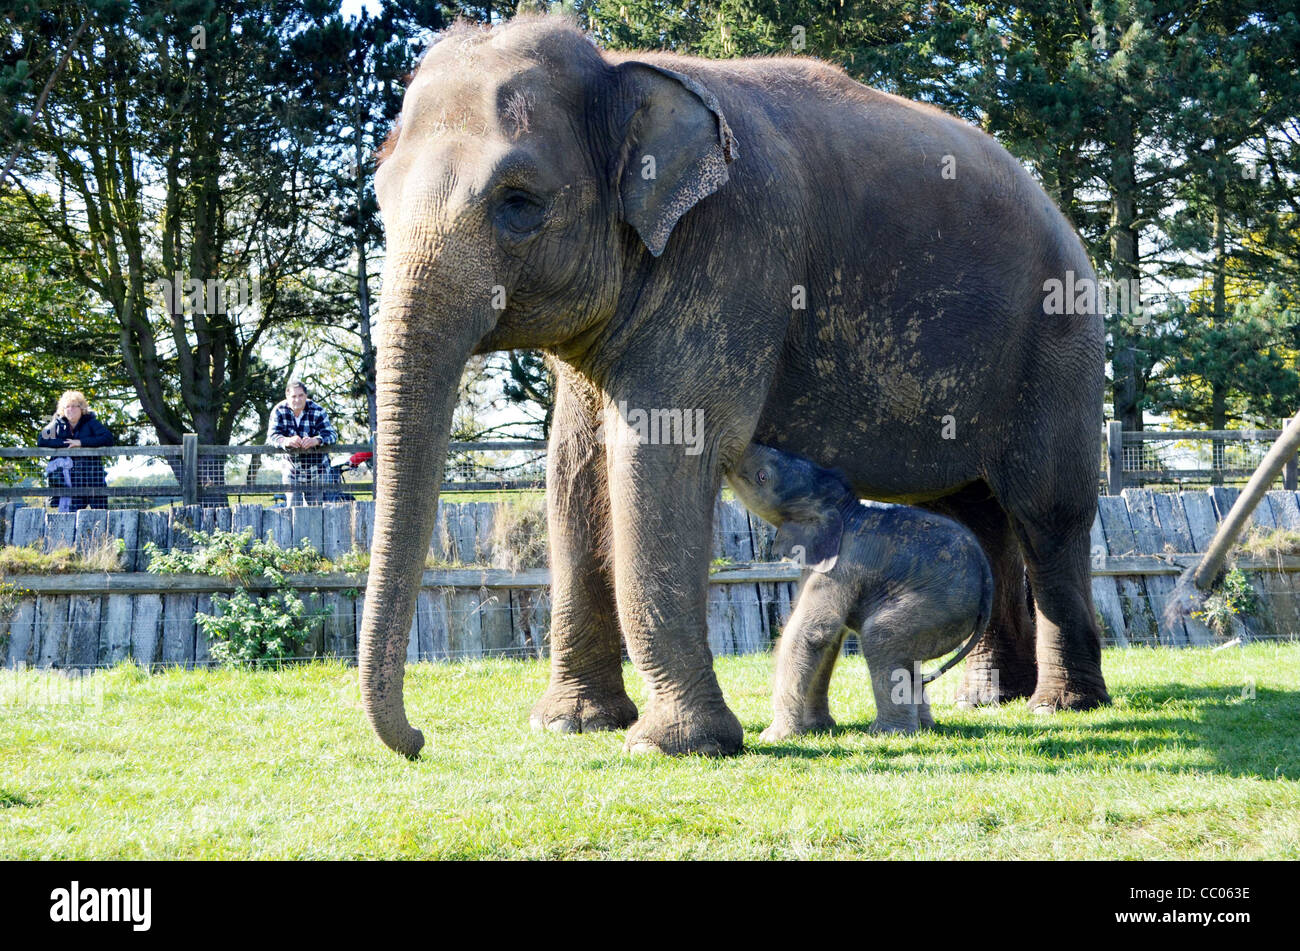 Smallest baby elephant ever born at Whipsnade Zoo. Stock Photo